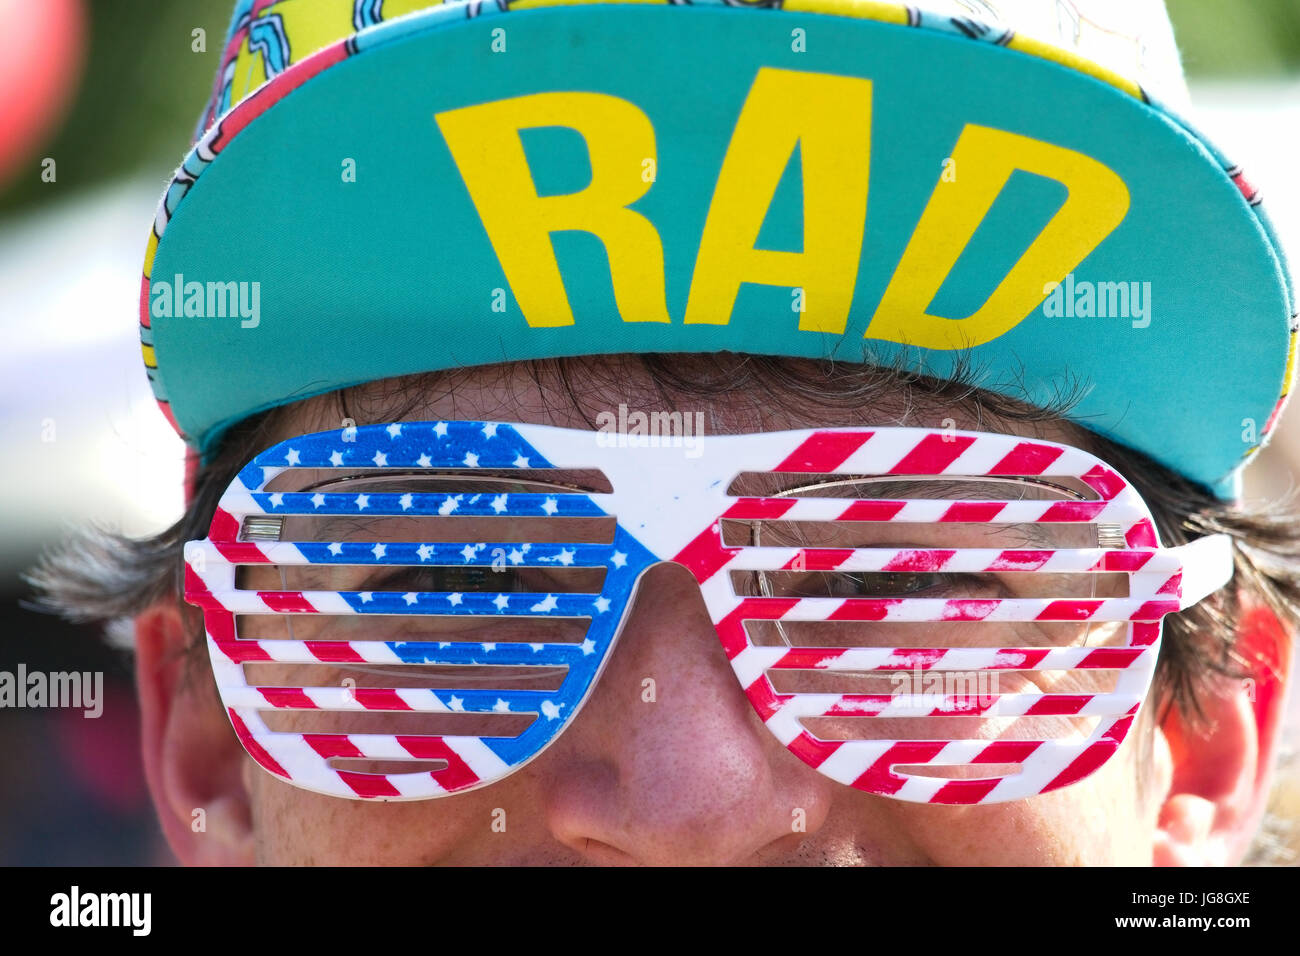 Sullivan's Island, South Carolina, USA. 4th July, 2017. A man shows off his stars and stripes glasses during the annual Sullivan's Island Independence Day parade July 4, 2017 in Sullivan's Island, South Carolina. The tiny affluent sea island hosts a bicycle and golf cart parade through the historic village. Credit: Planetpix/Alamy Live News Stock Photo